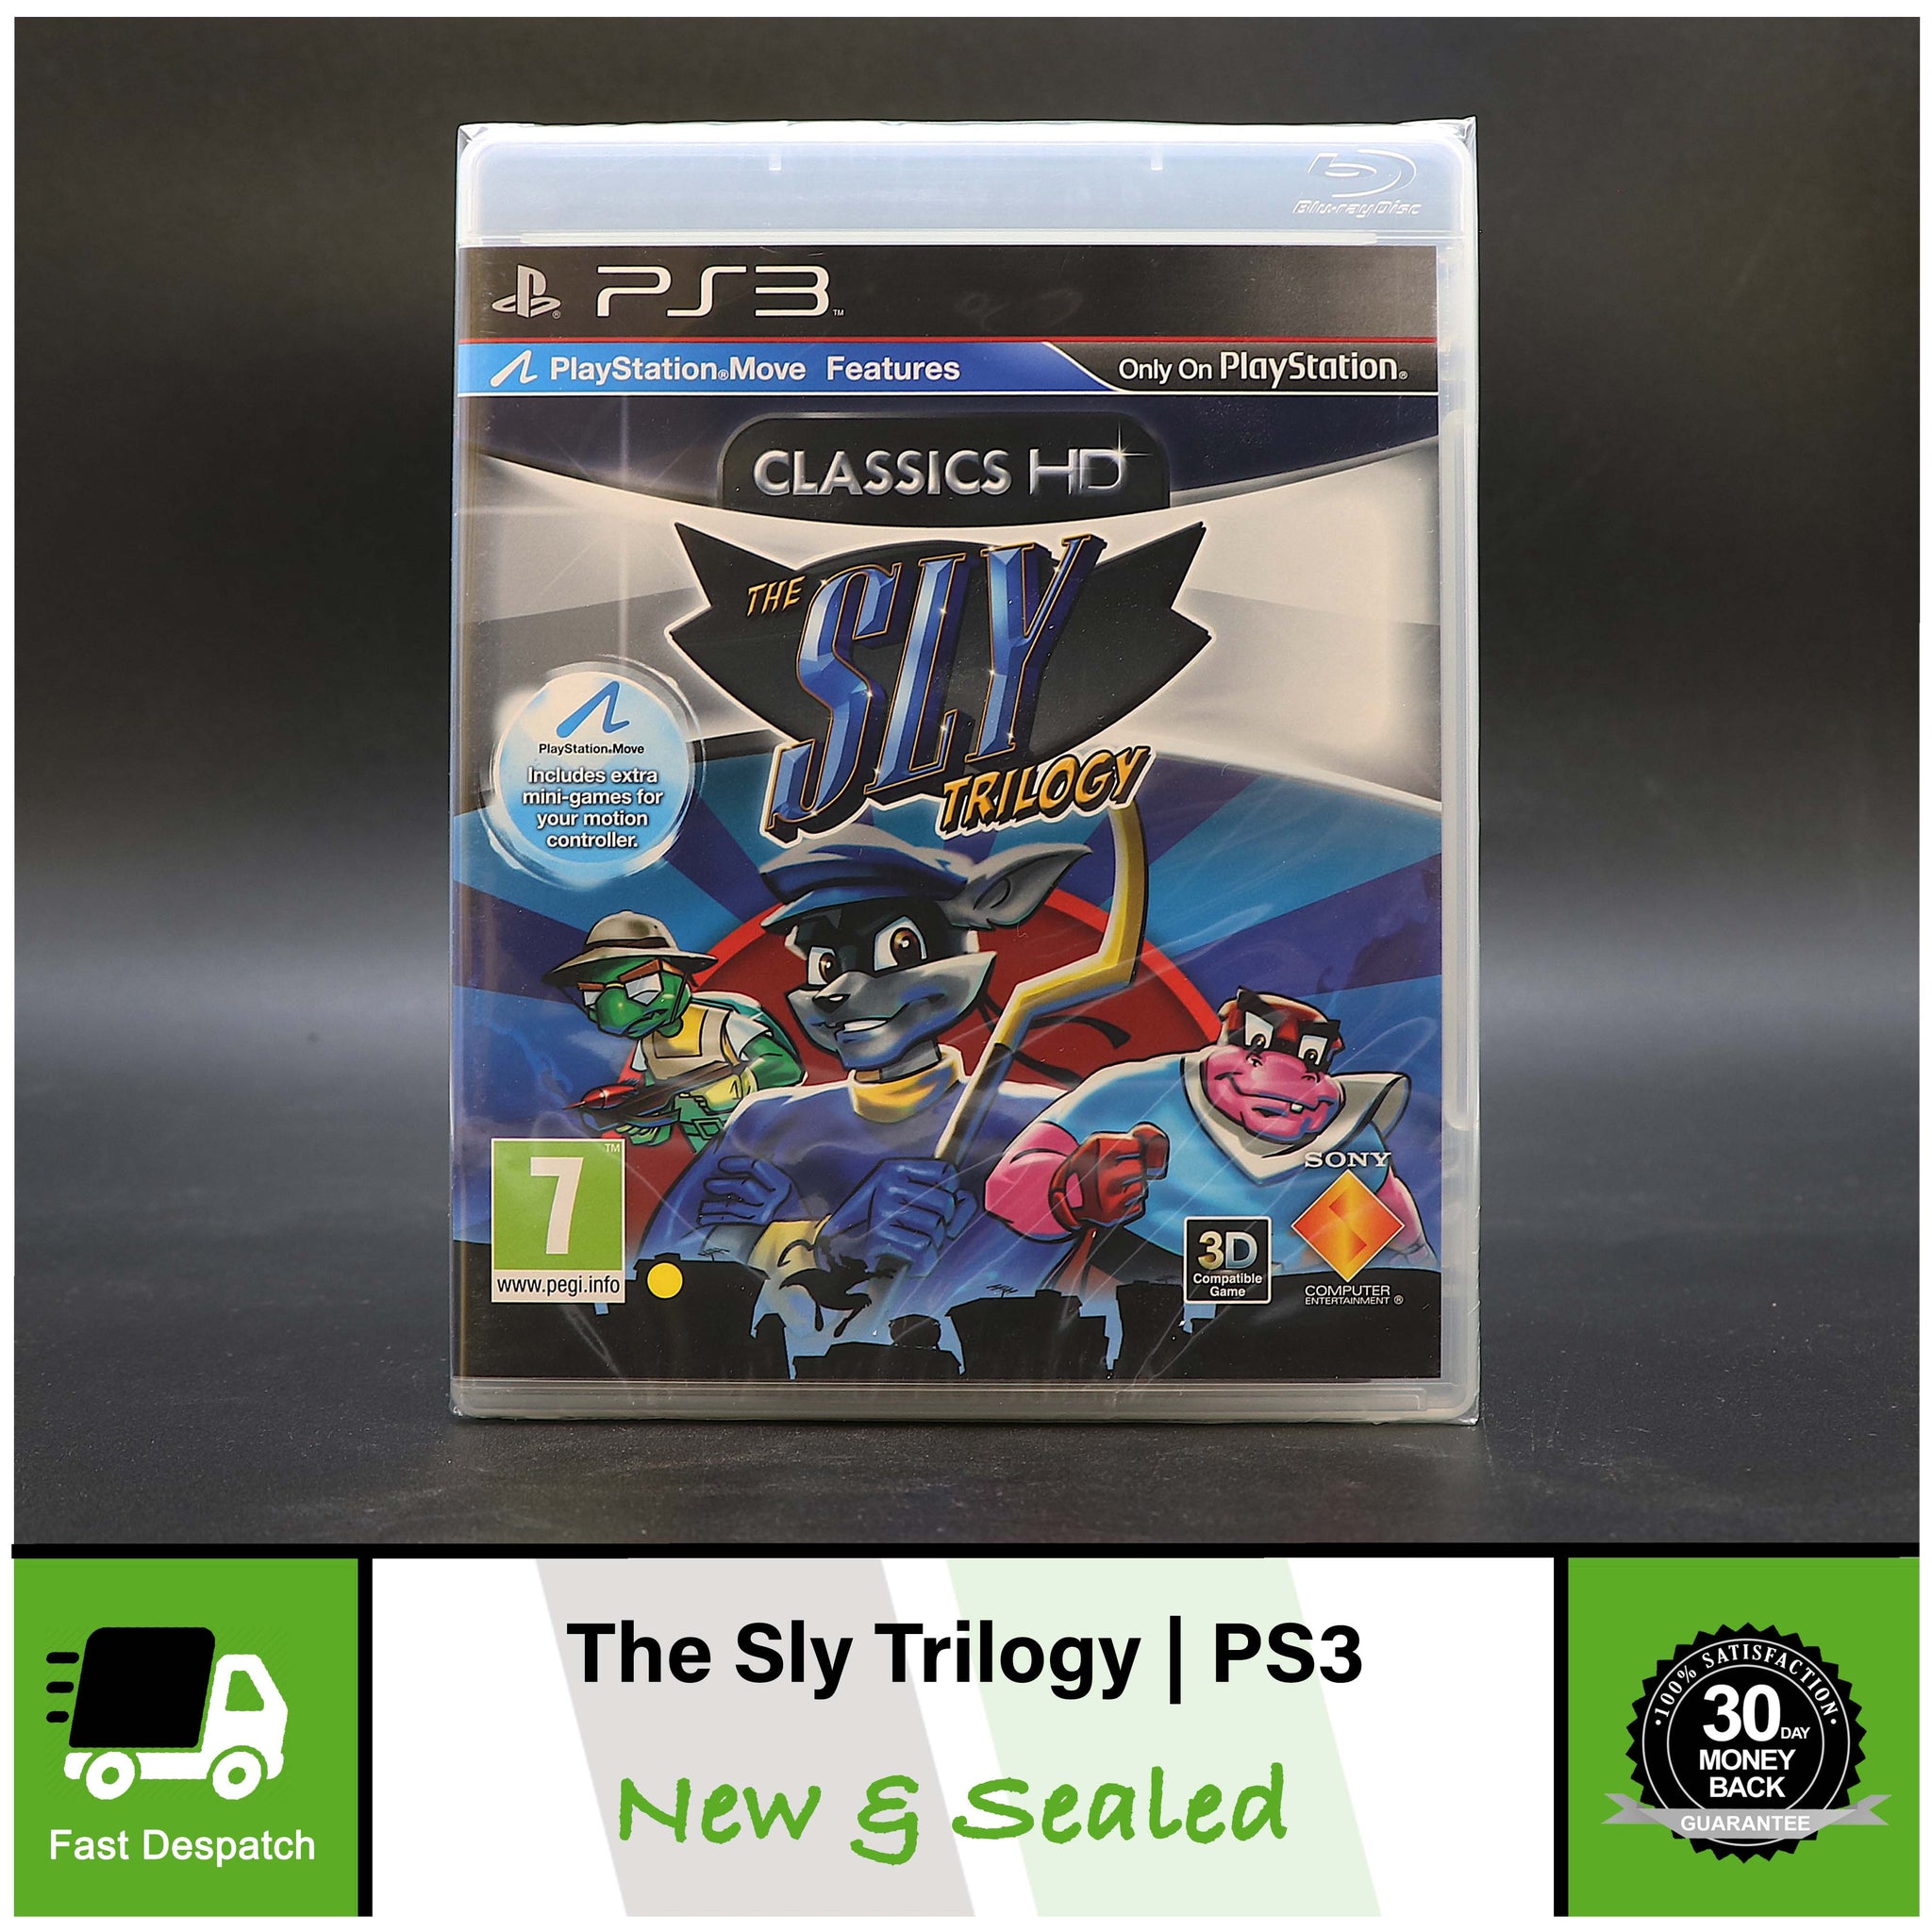 The Sly Trilogy (Cooper) Classics HD | Sony PlayStation 3 PS3 Game | New